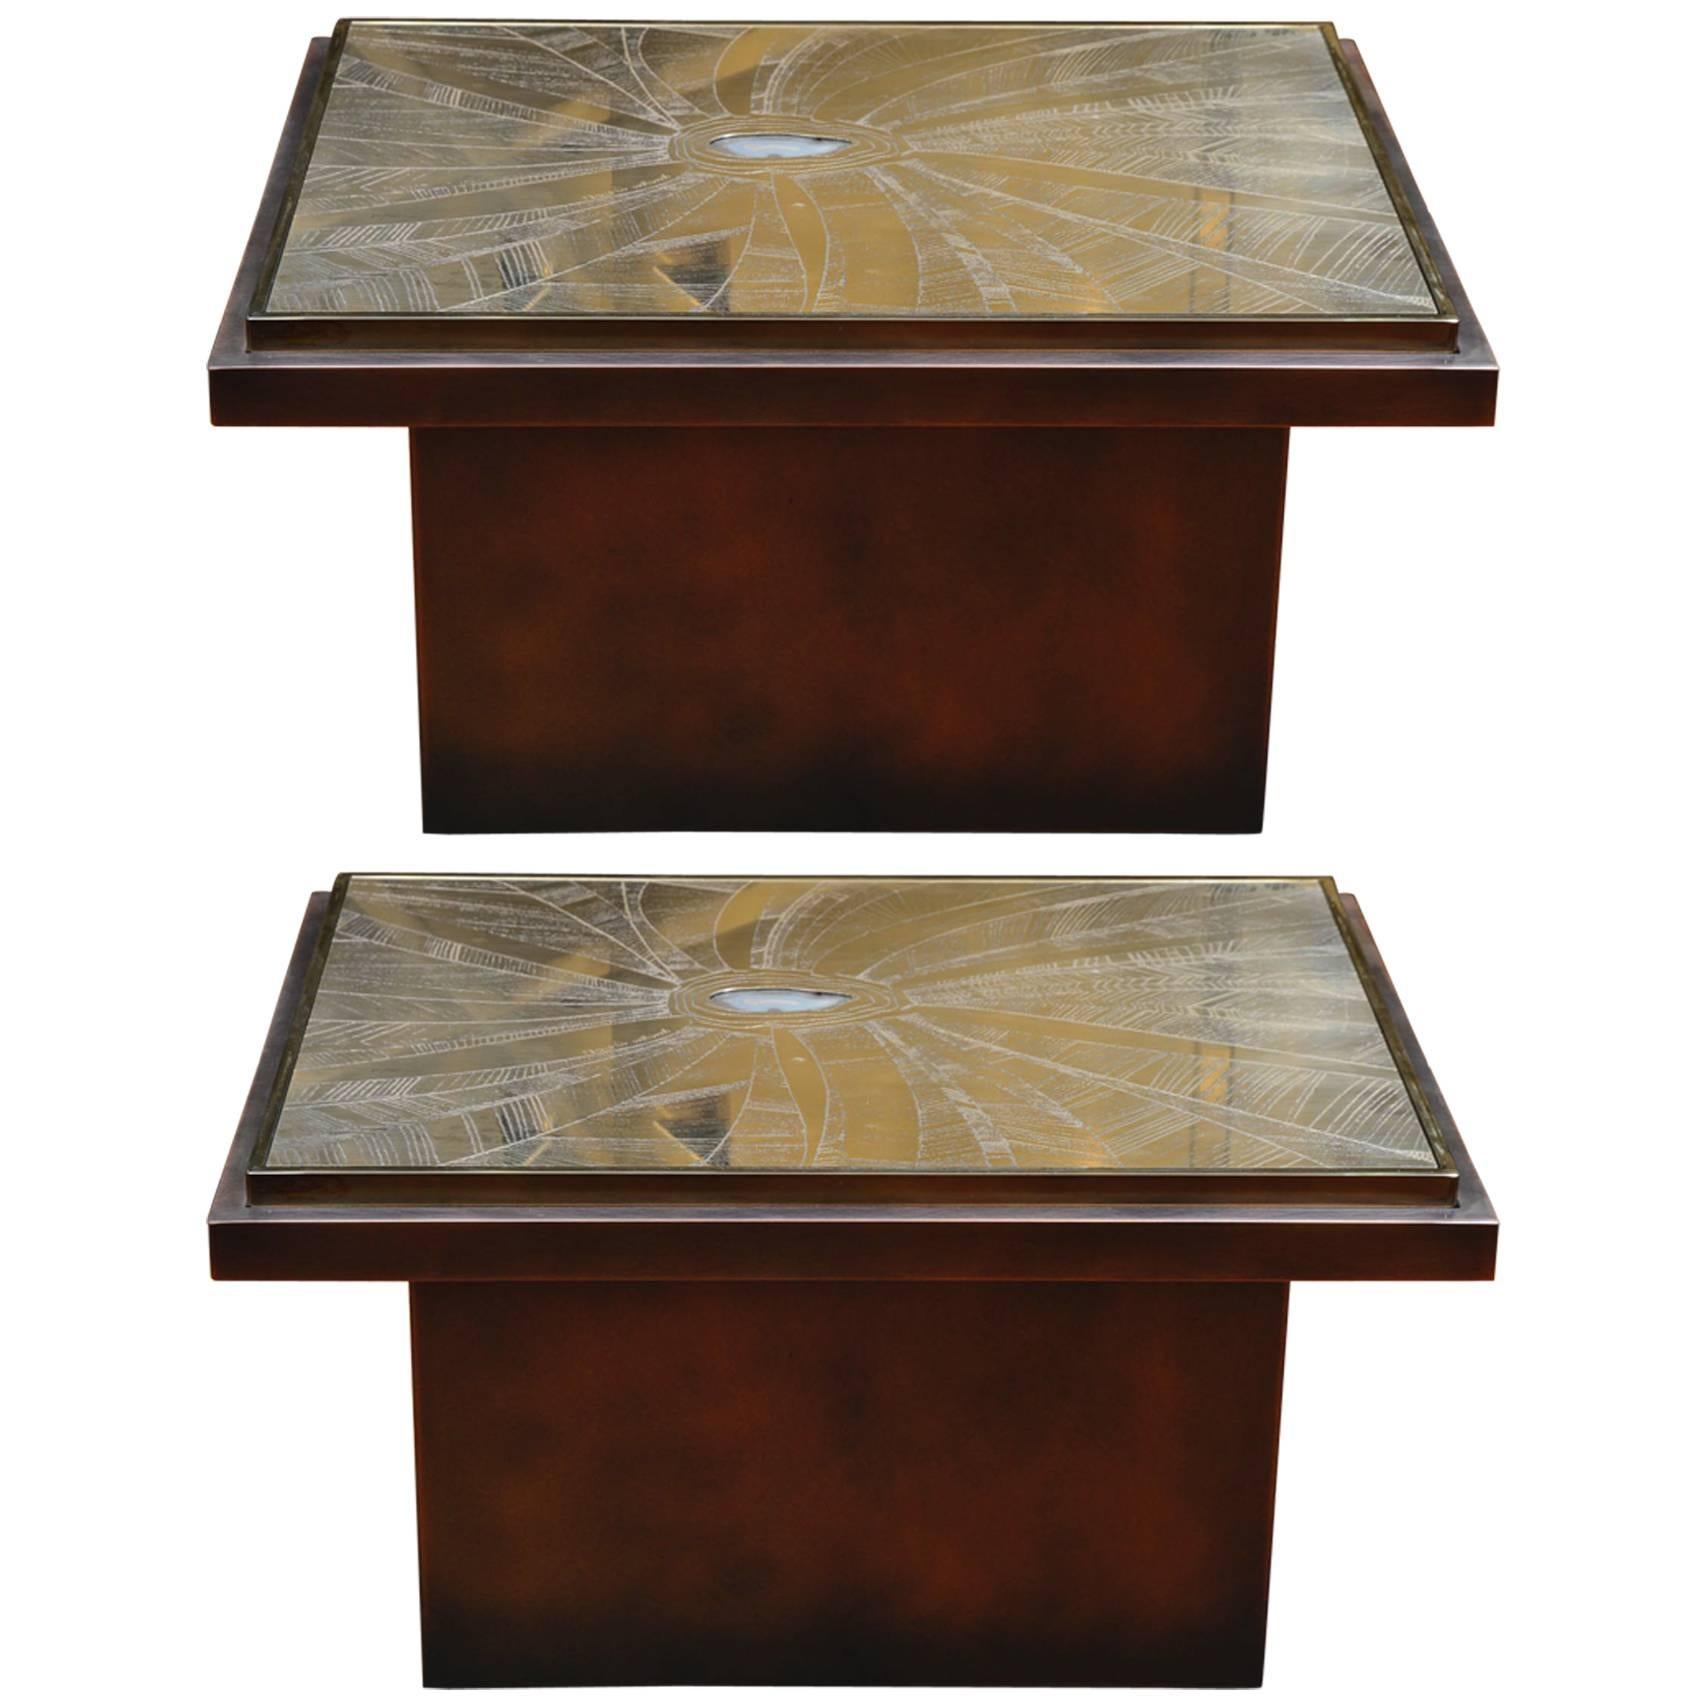 Pair of Low Tables by Georges Matthias at cost price.